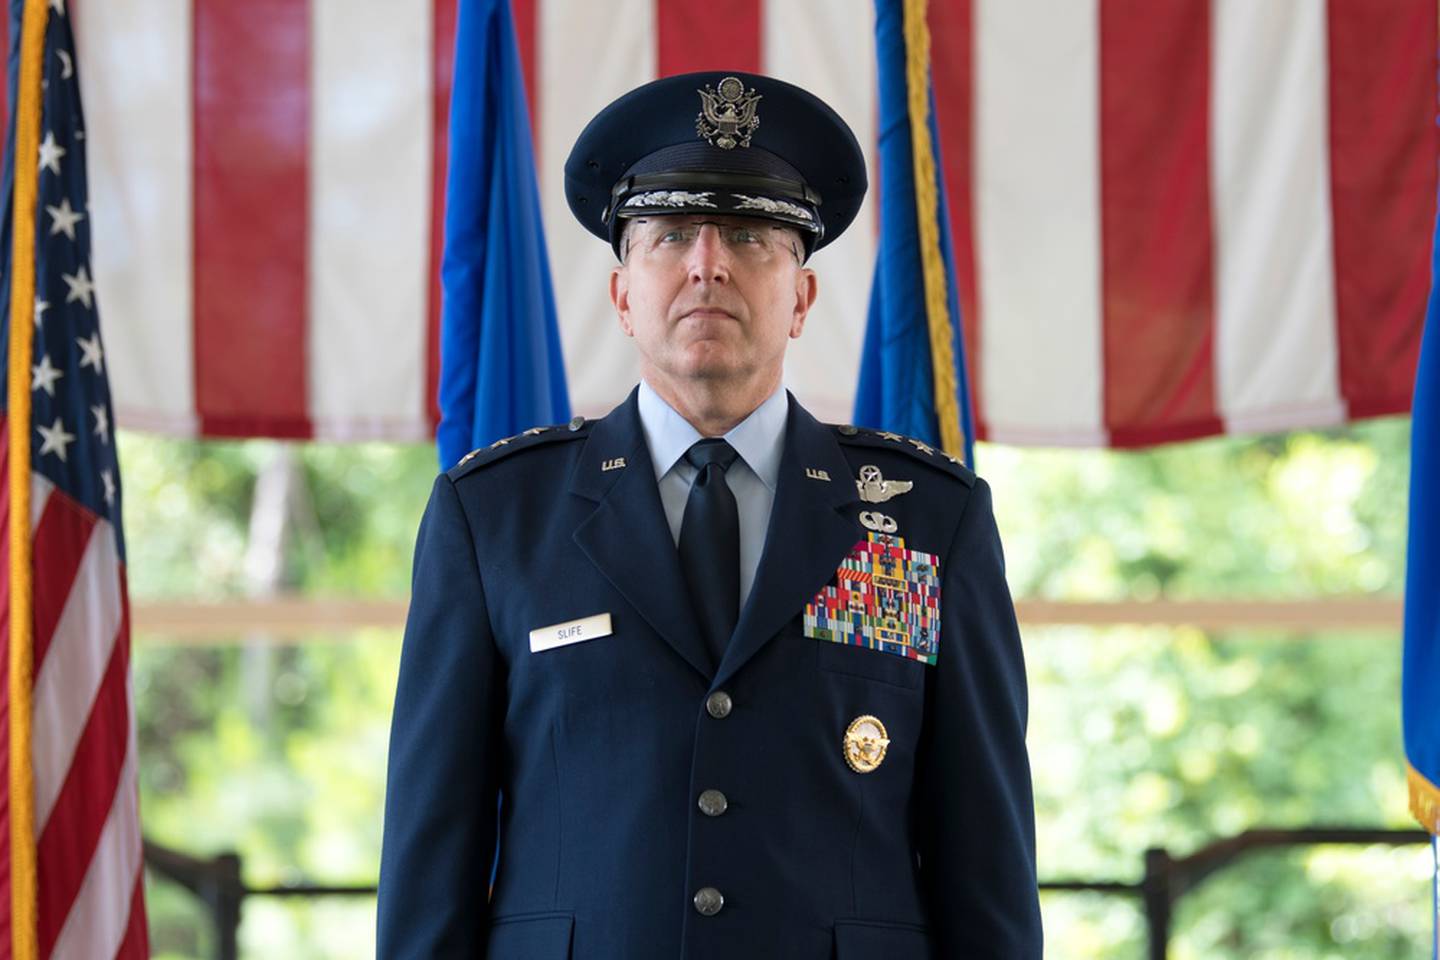 Air Force Lt. Gen. Jim Slife, commander of Air Force Special Operations Command, presides over a change-of-command ceremony at Hurlburt Field, Florida, June 4, 2021. (Tech Sgt. Victor J. Caputo/Air Force)